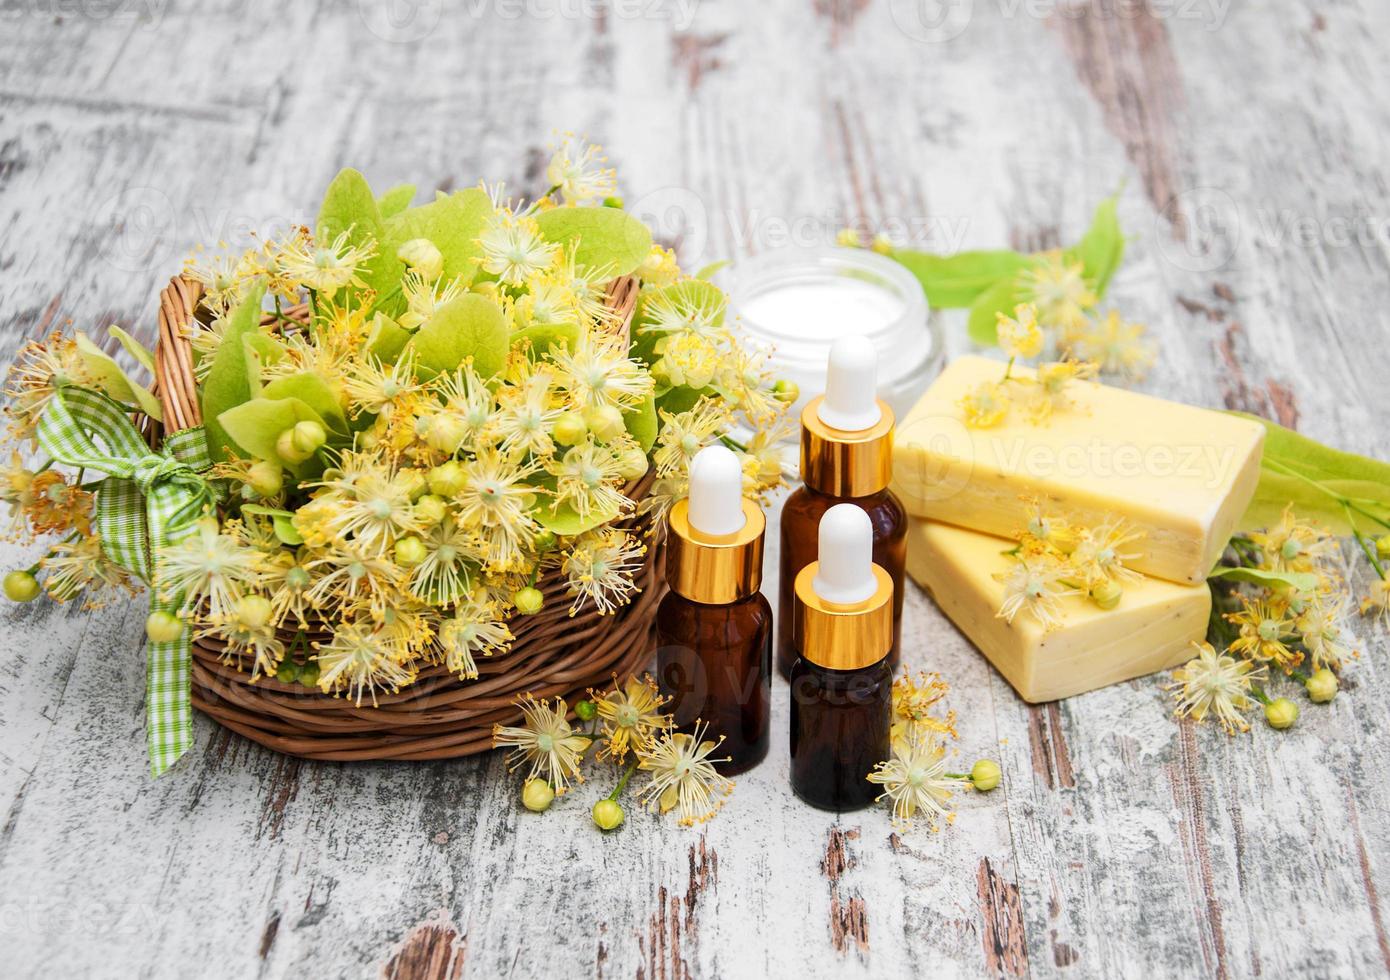 Spa products with linden flowers photo